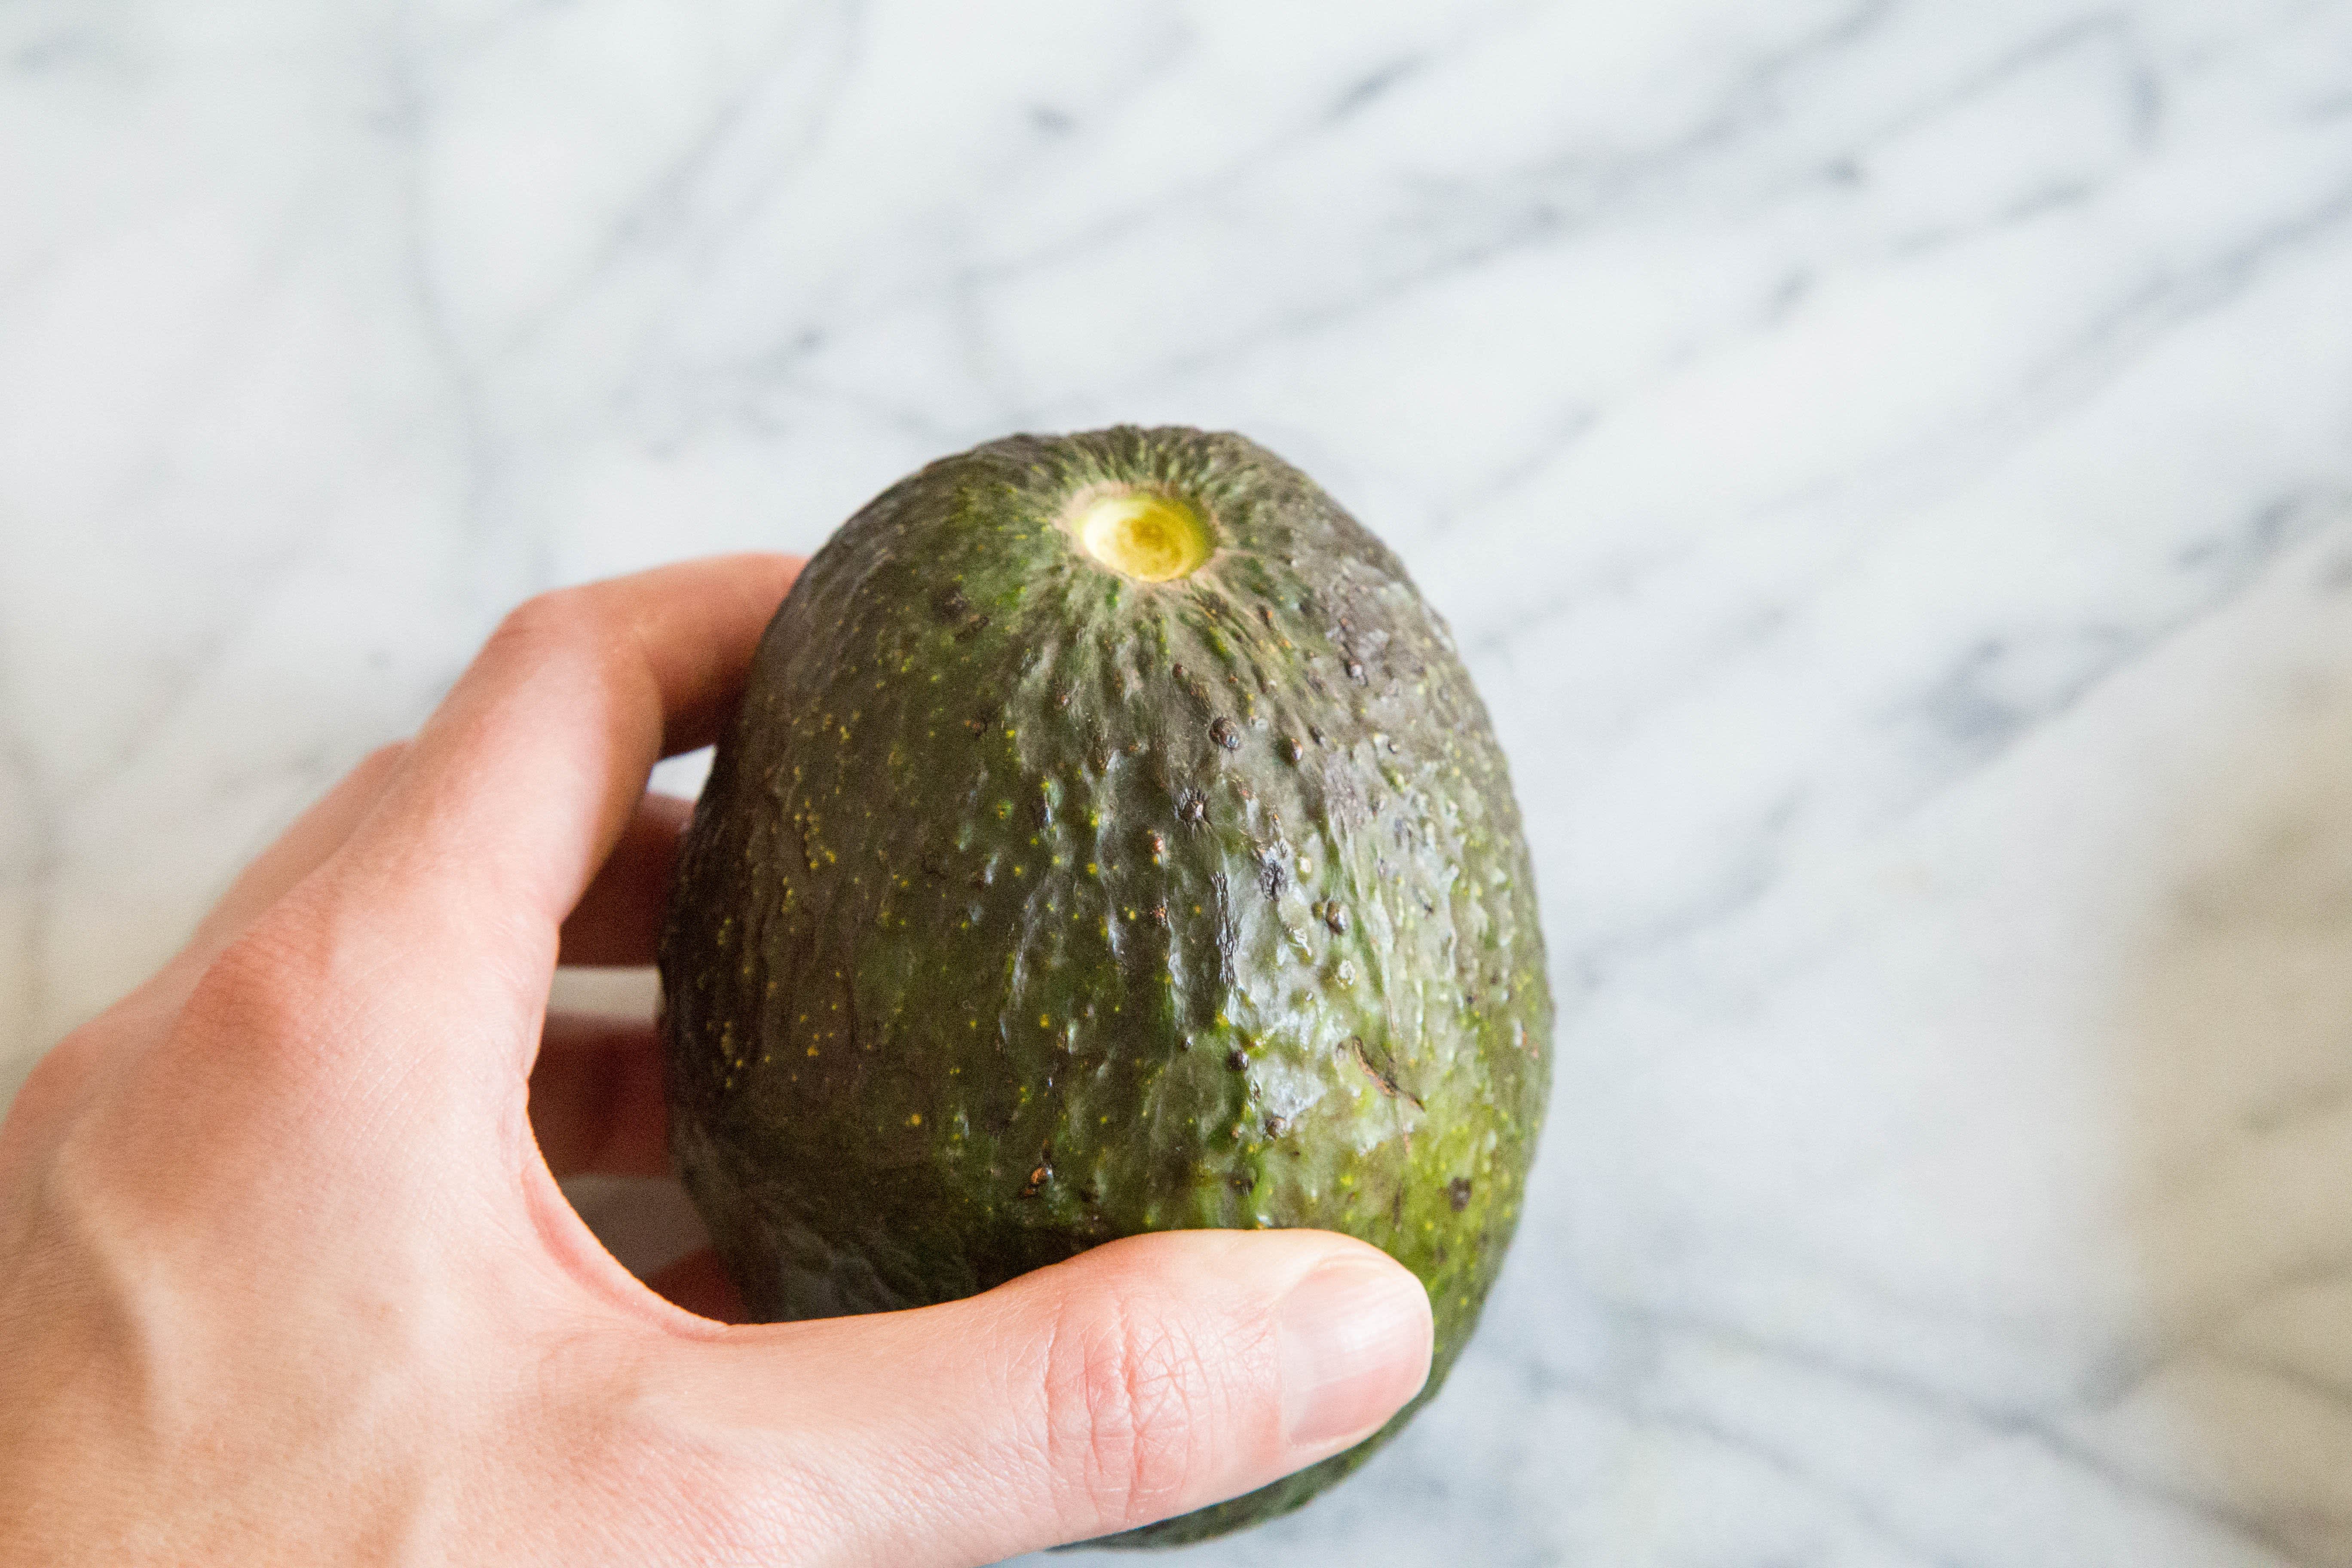 How to tell if an Avocado is Ripe - How to Pick an Avocado